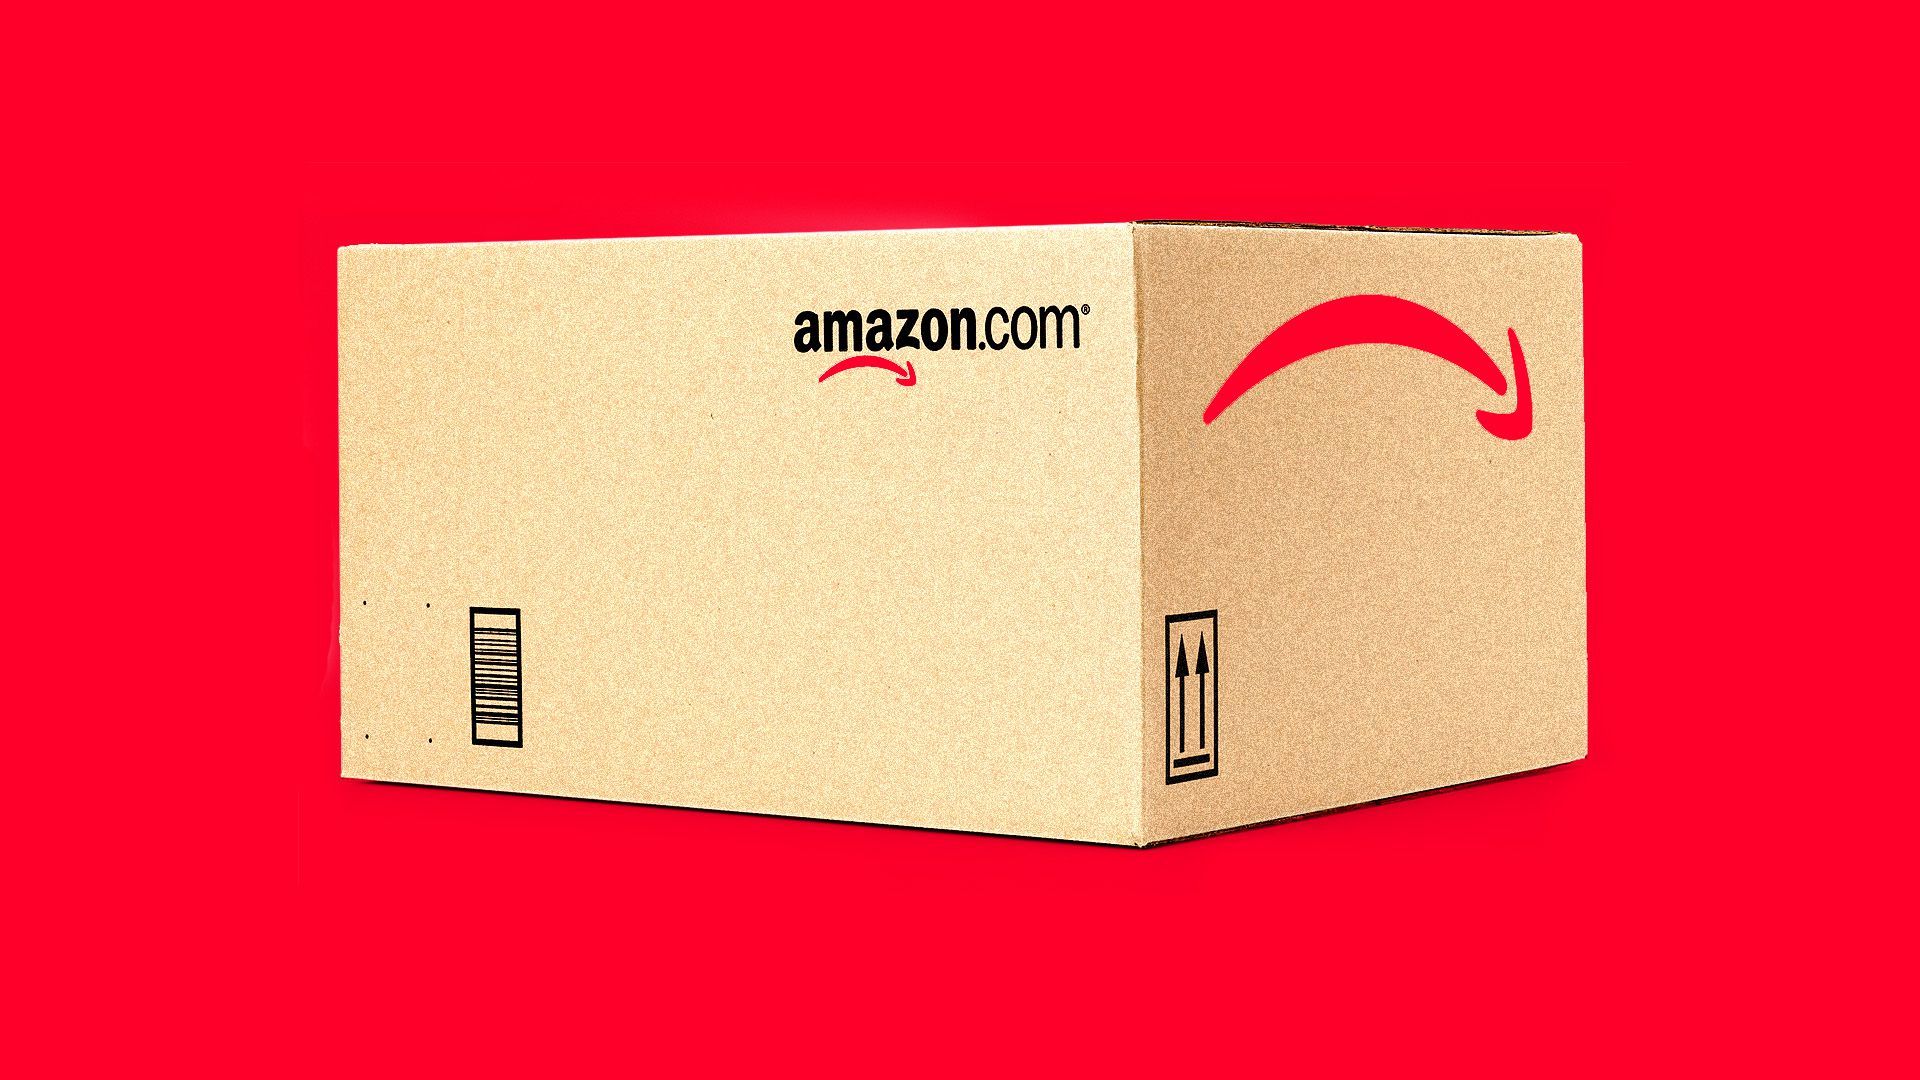 Illustration of Amazon box with red background